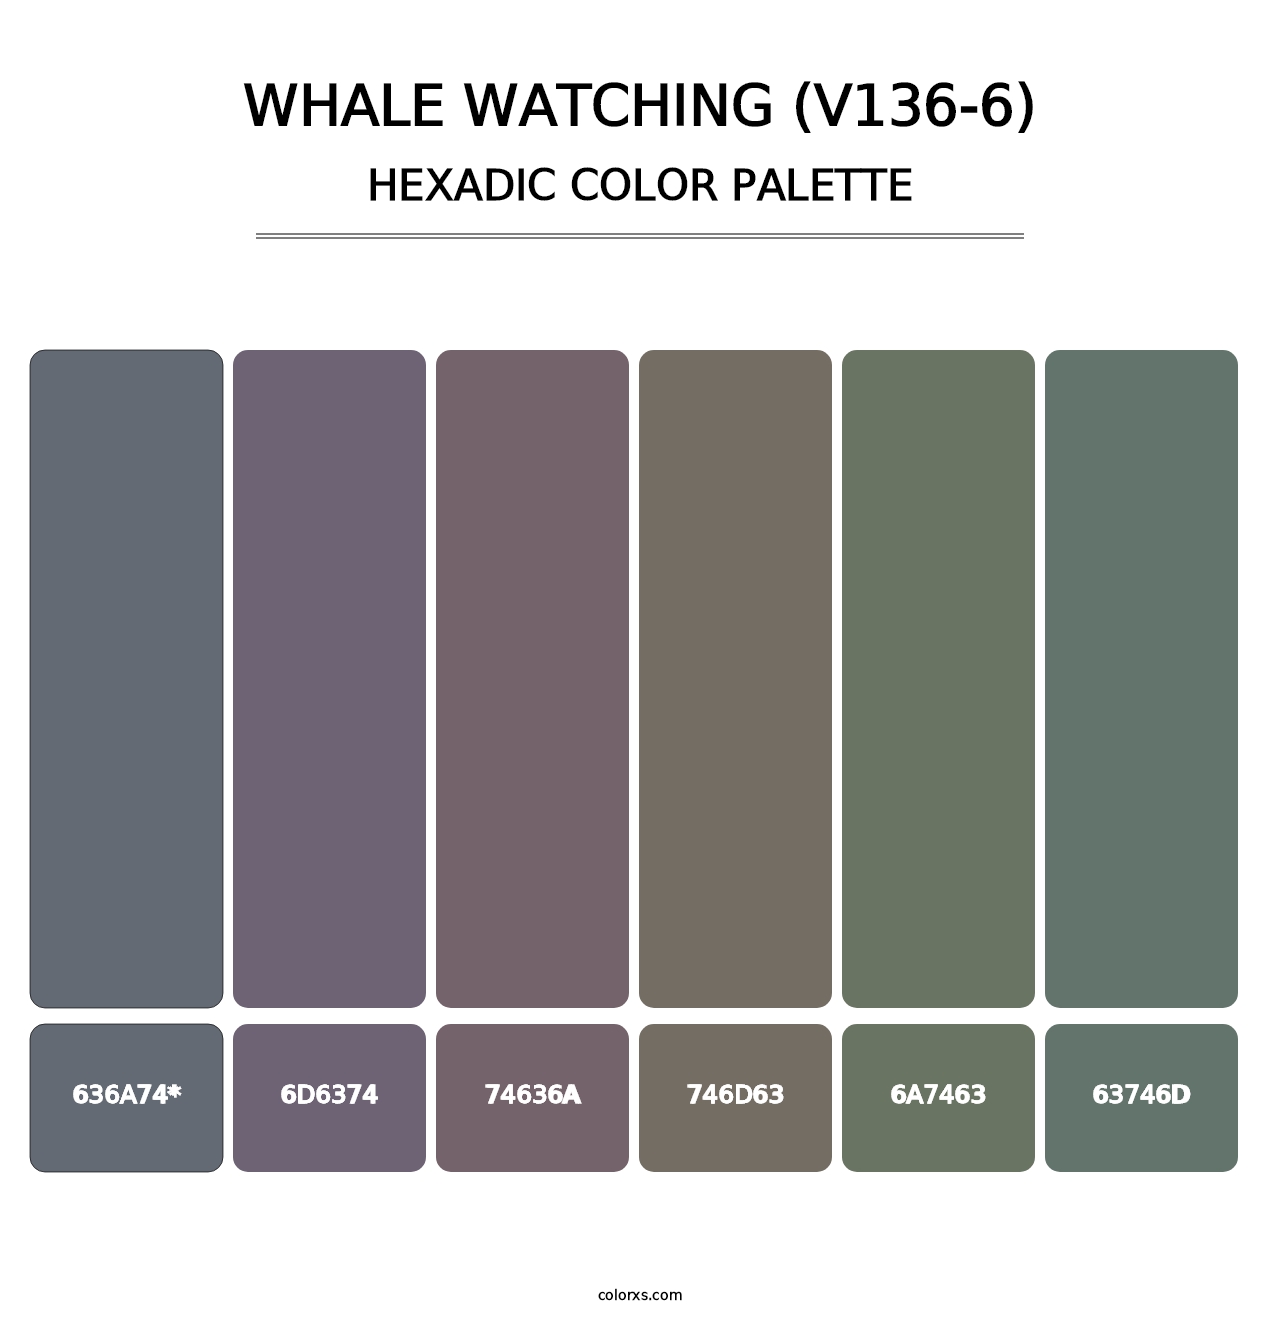 Whale Watching (V136-6) - Hexadic Color Palette